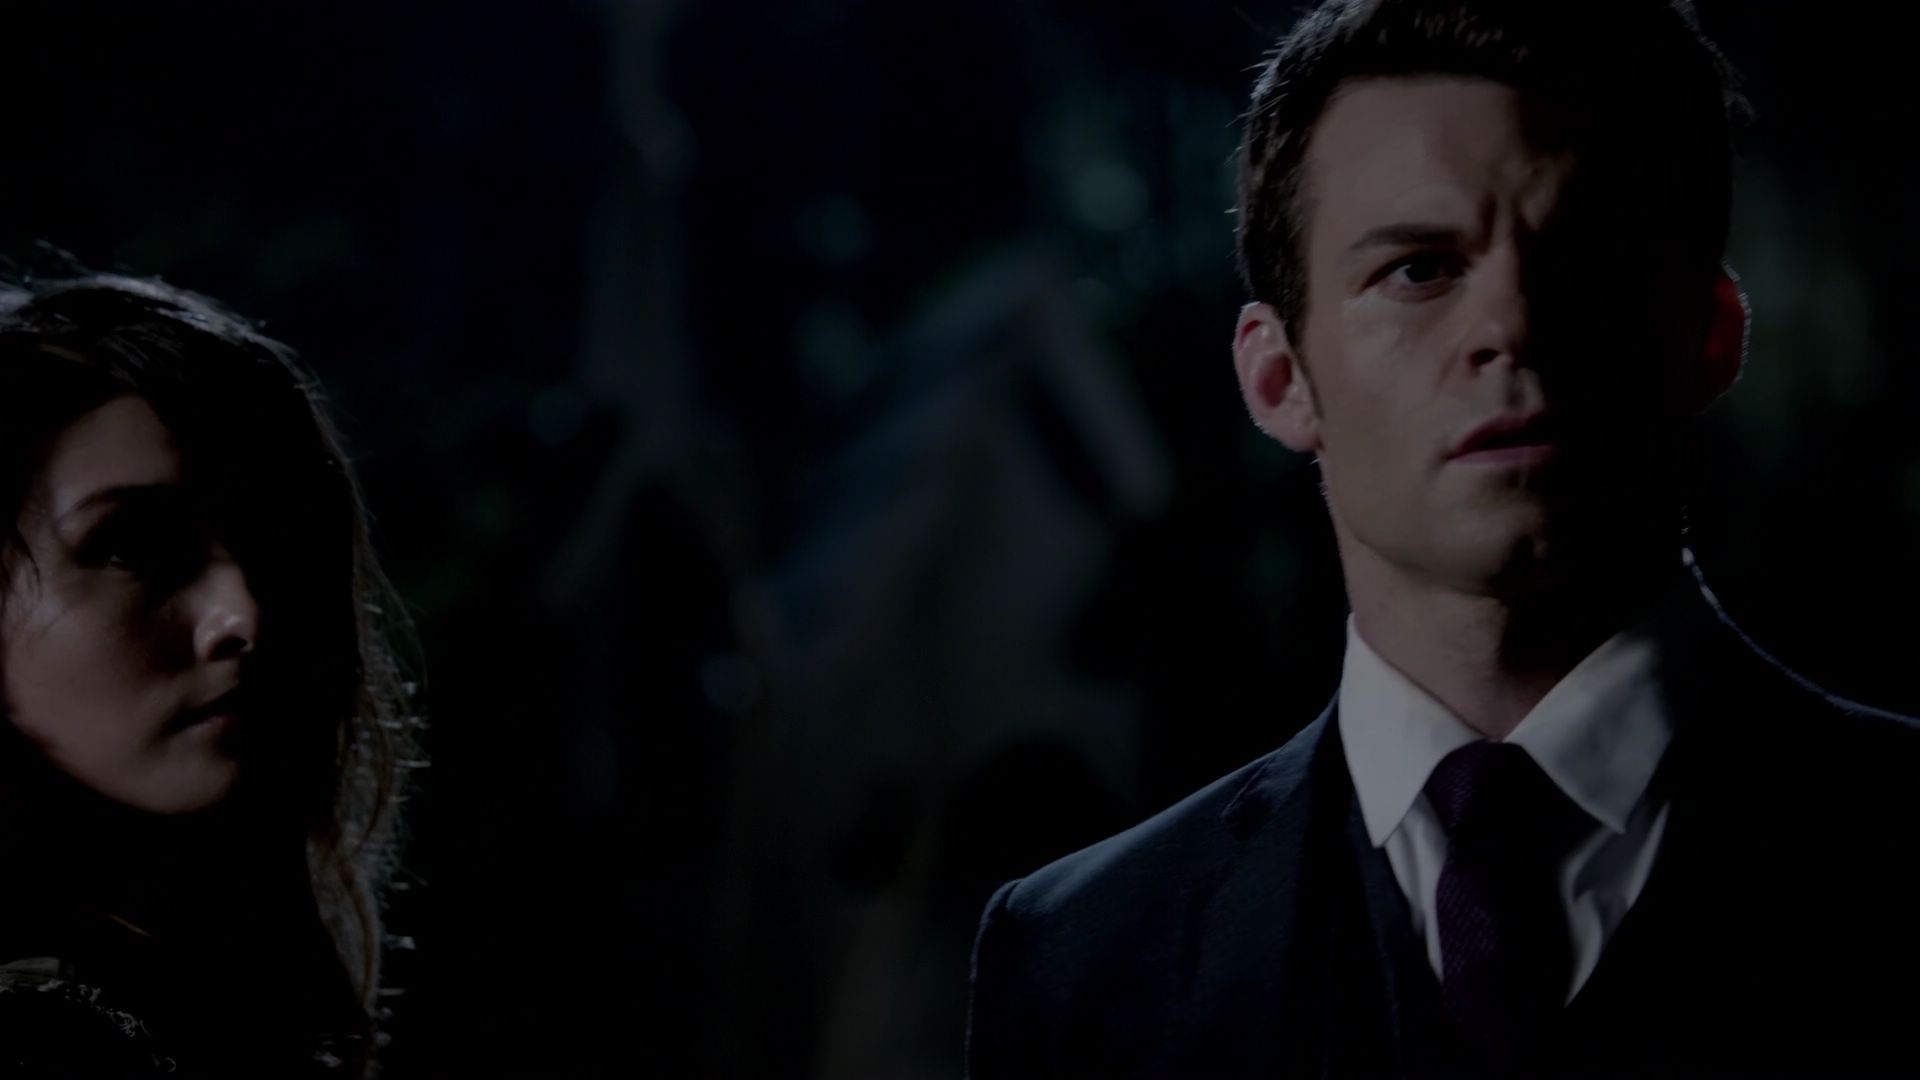 The Originals Tv Show Fan Club Fansite With Photos Videos And More